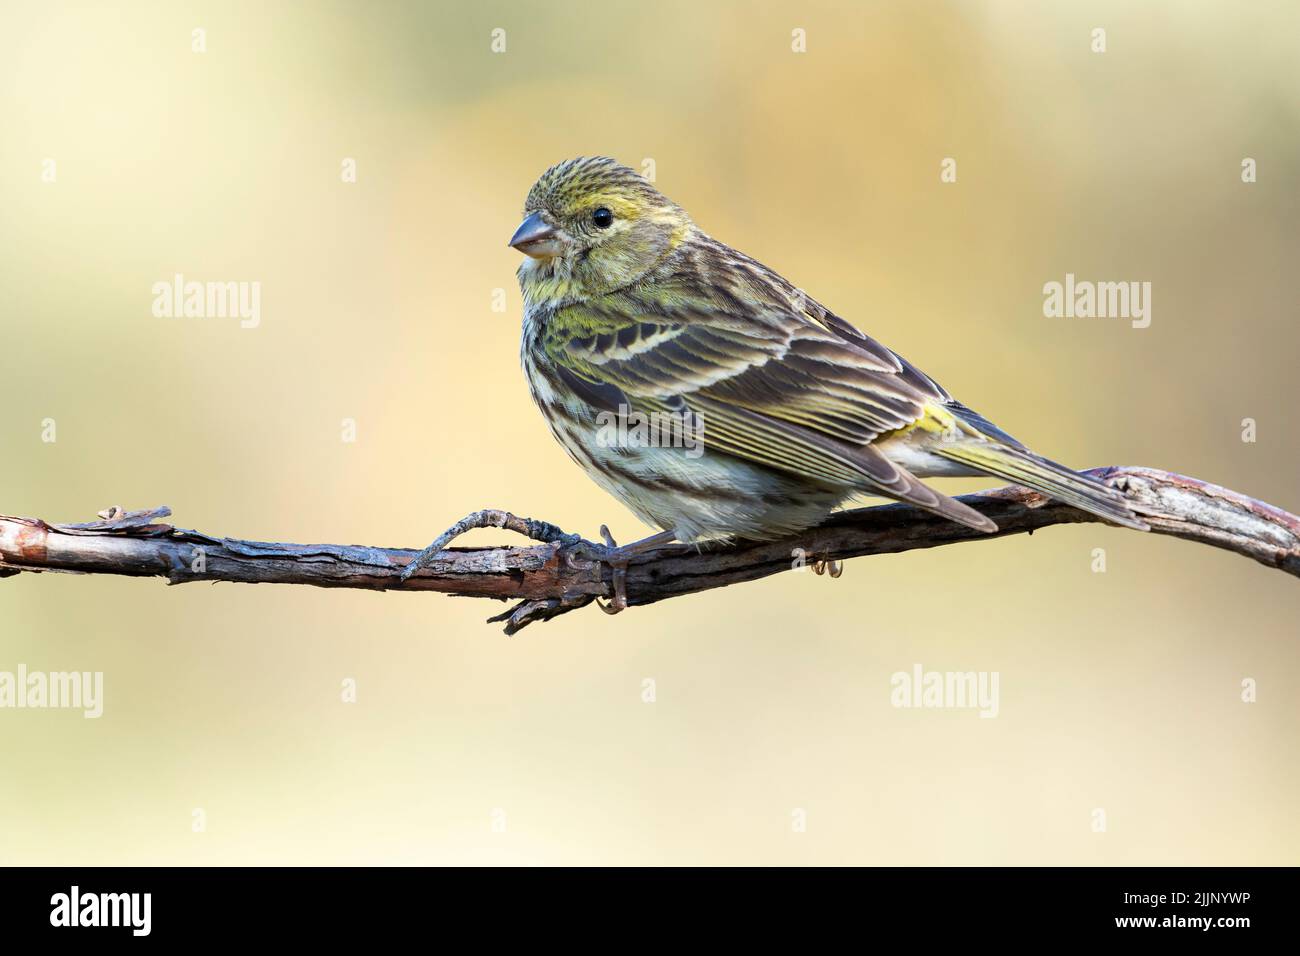 Female European Serin (Serinus serinus) perched on a thin dry branch on a uniform ocher background in nature Stock Photo